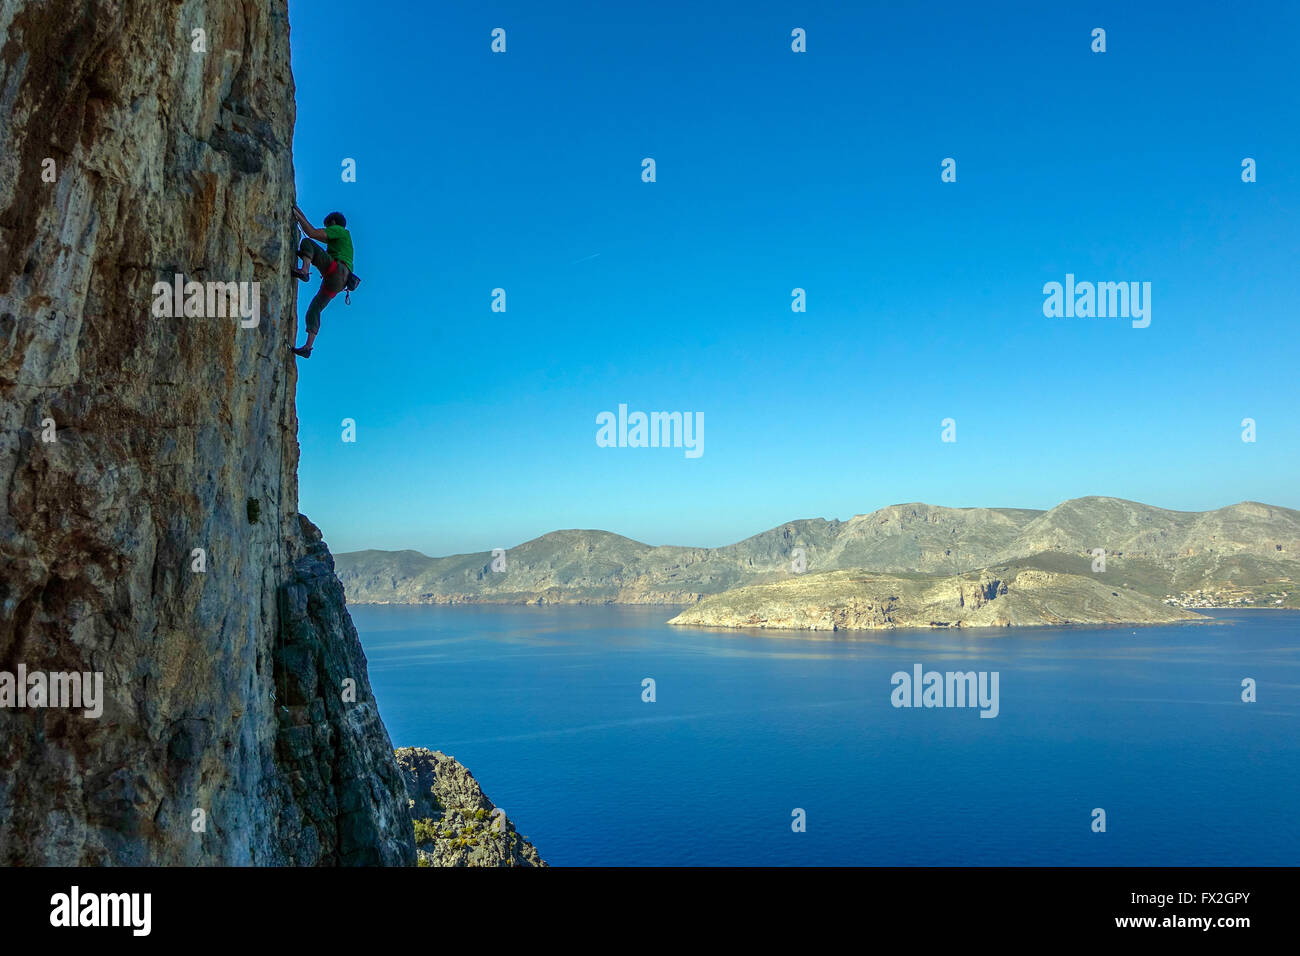 small rock climber silhouetted on steep cliff with blue sea behind Stock Photo